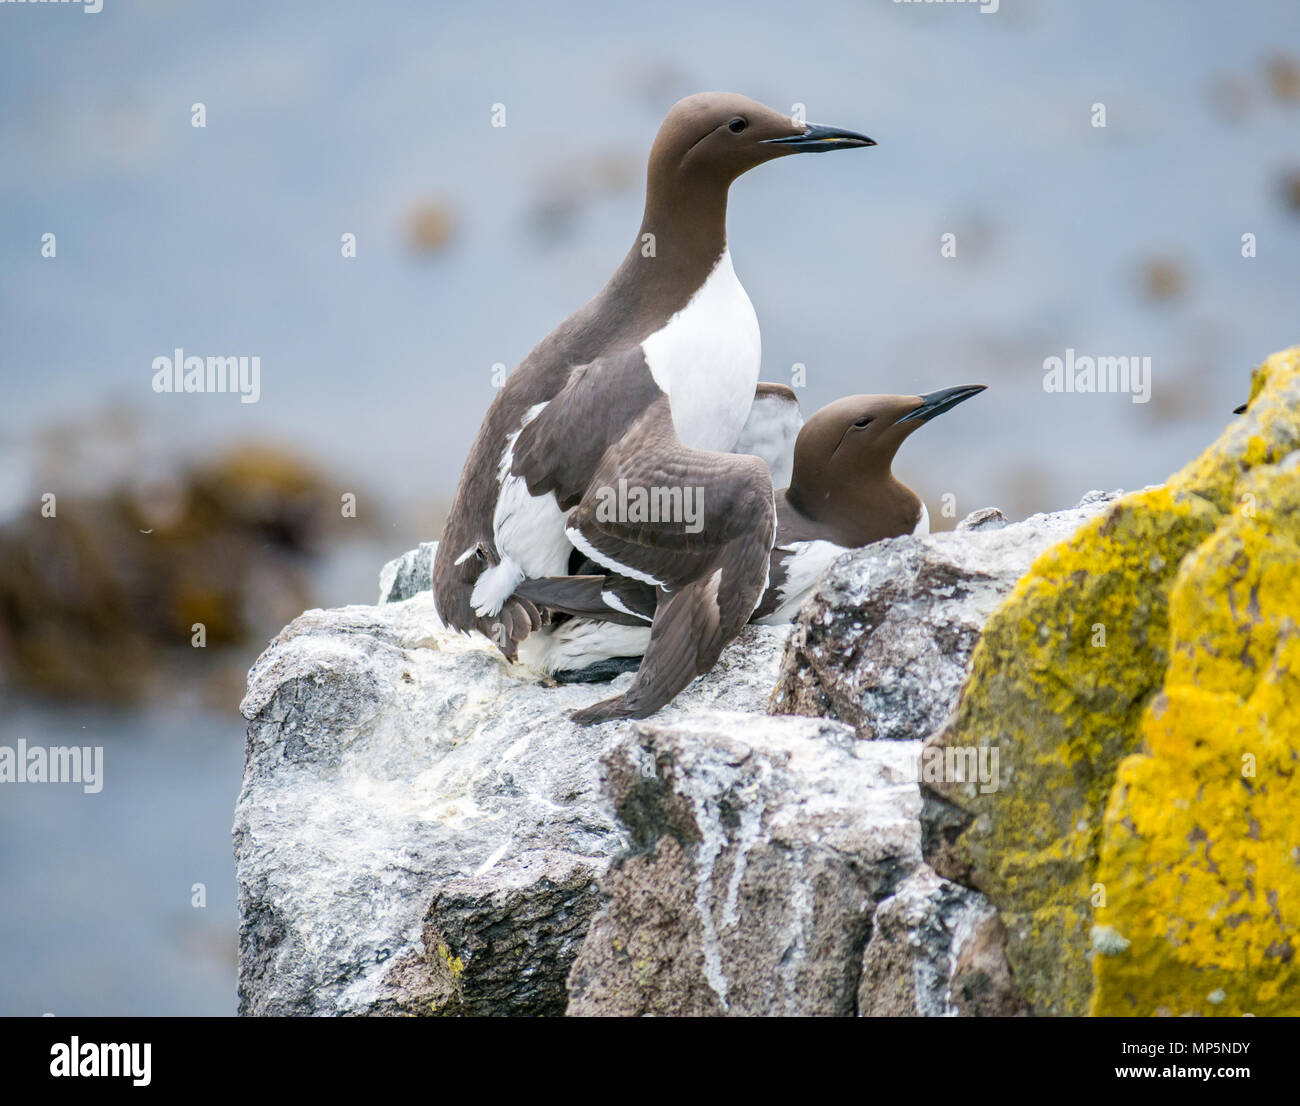 A mating pair of guillemot seabirds, Uria aalge, on a rocky ledge, Isle of May, Firth of Forth. Scotland, UK Stock Photo